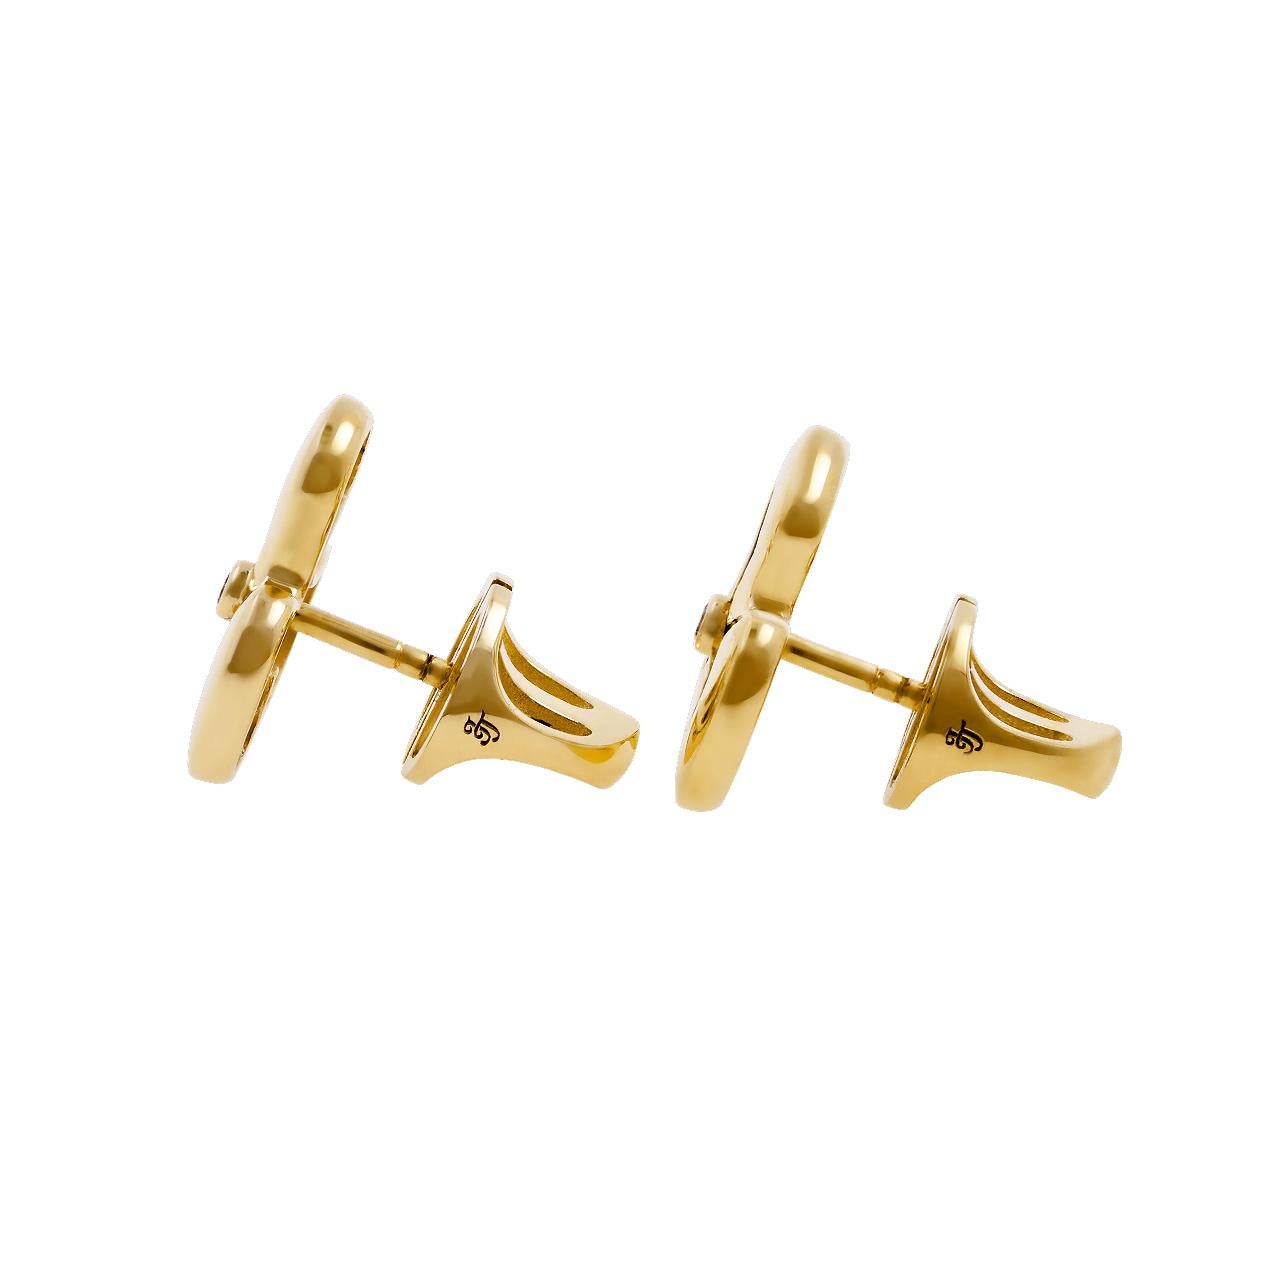 - 2 Round Diamonds - 0.04 ct, E-F/VS
- 14K Yellow Gold 
- Weight: 3.73 g
This delicate pair of studs in 14k yellow gold is form the Free Forms collection. This unusual collection gives rise to all sorts of associations: droplets of ink escaping from